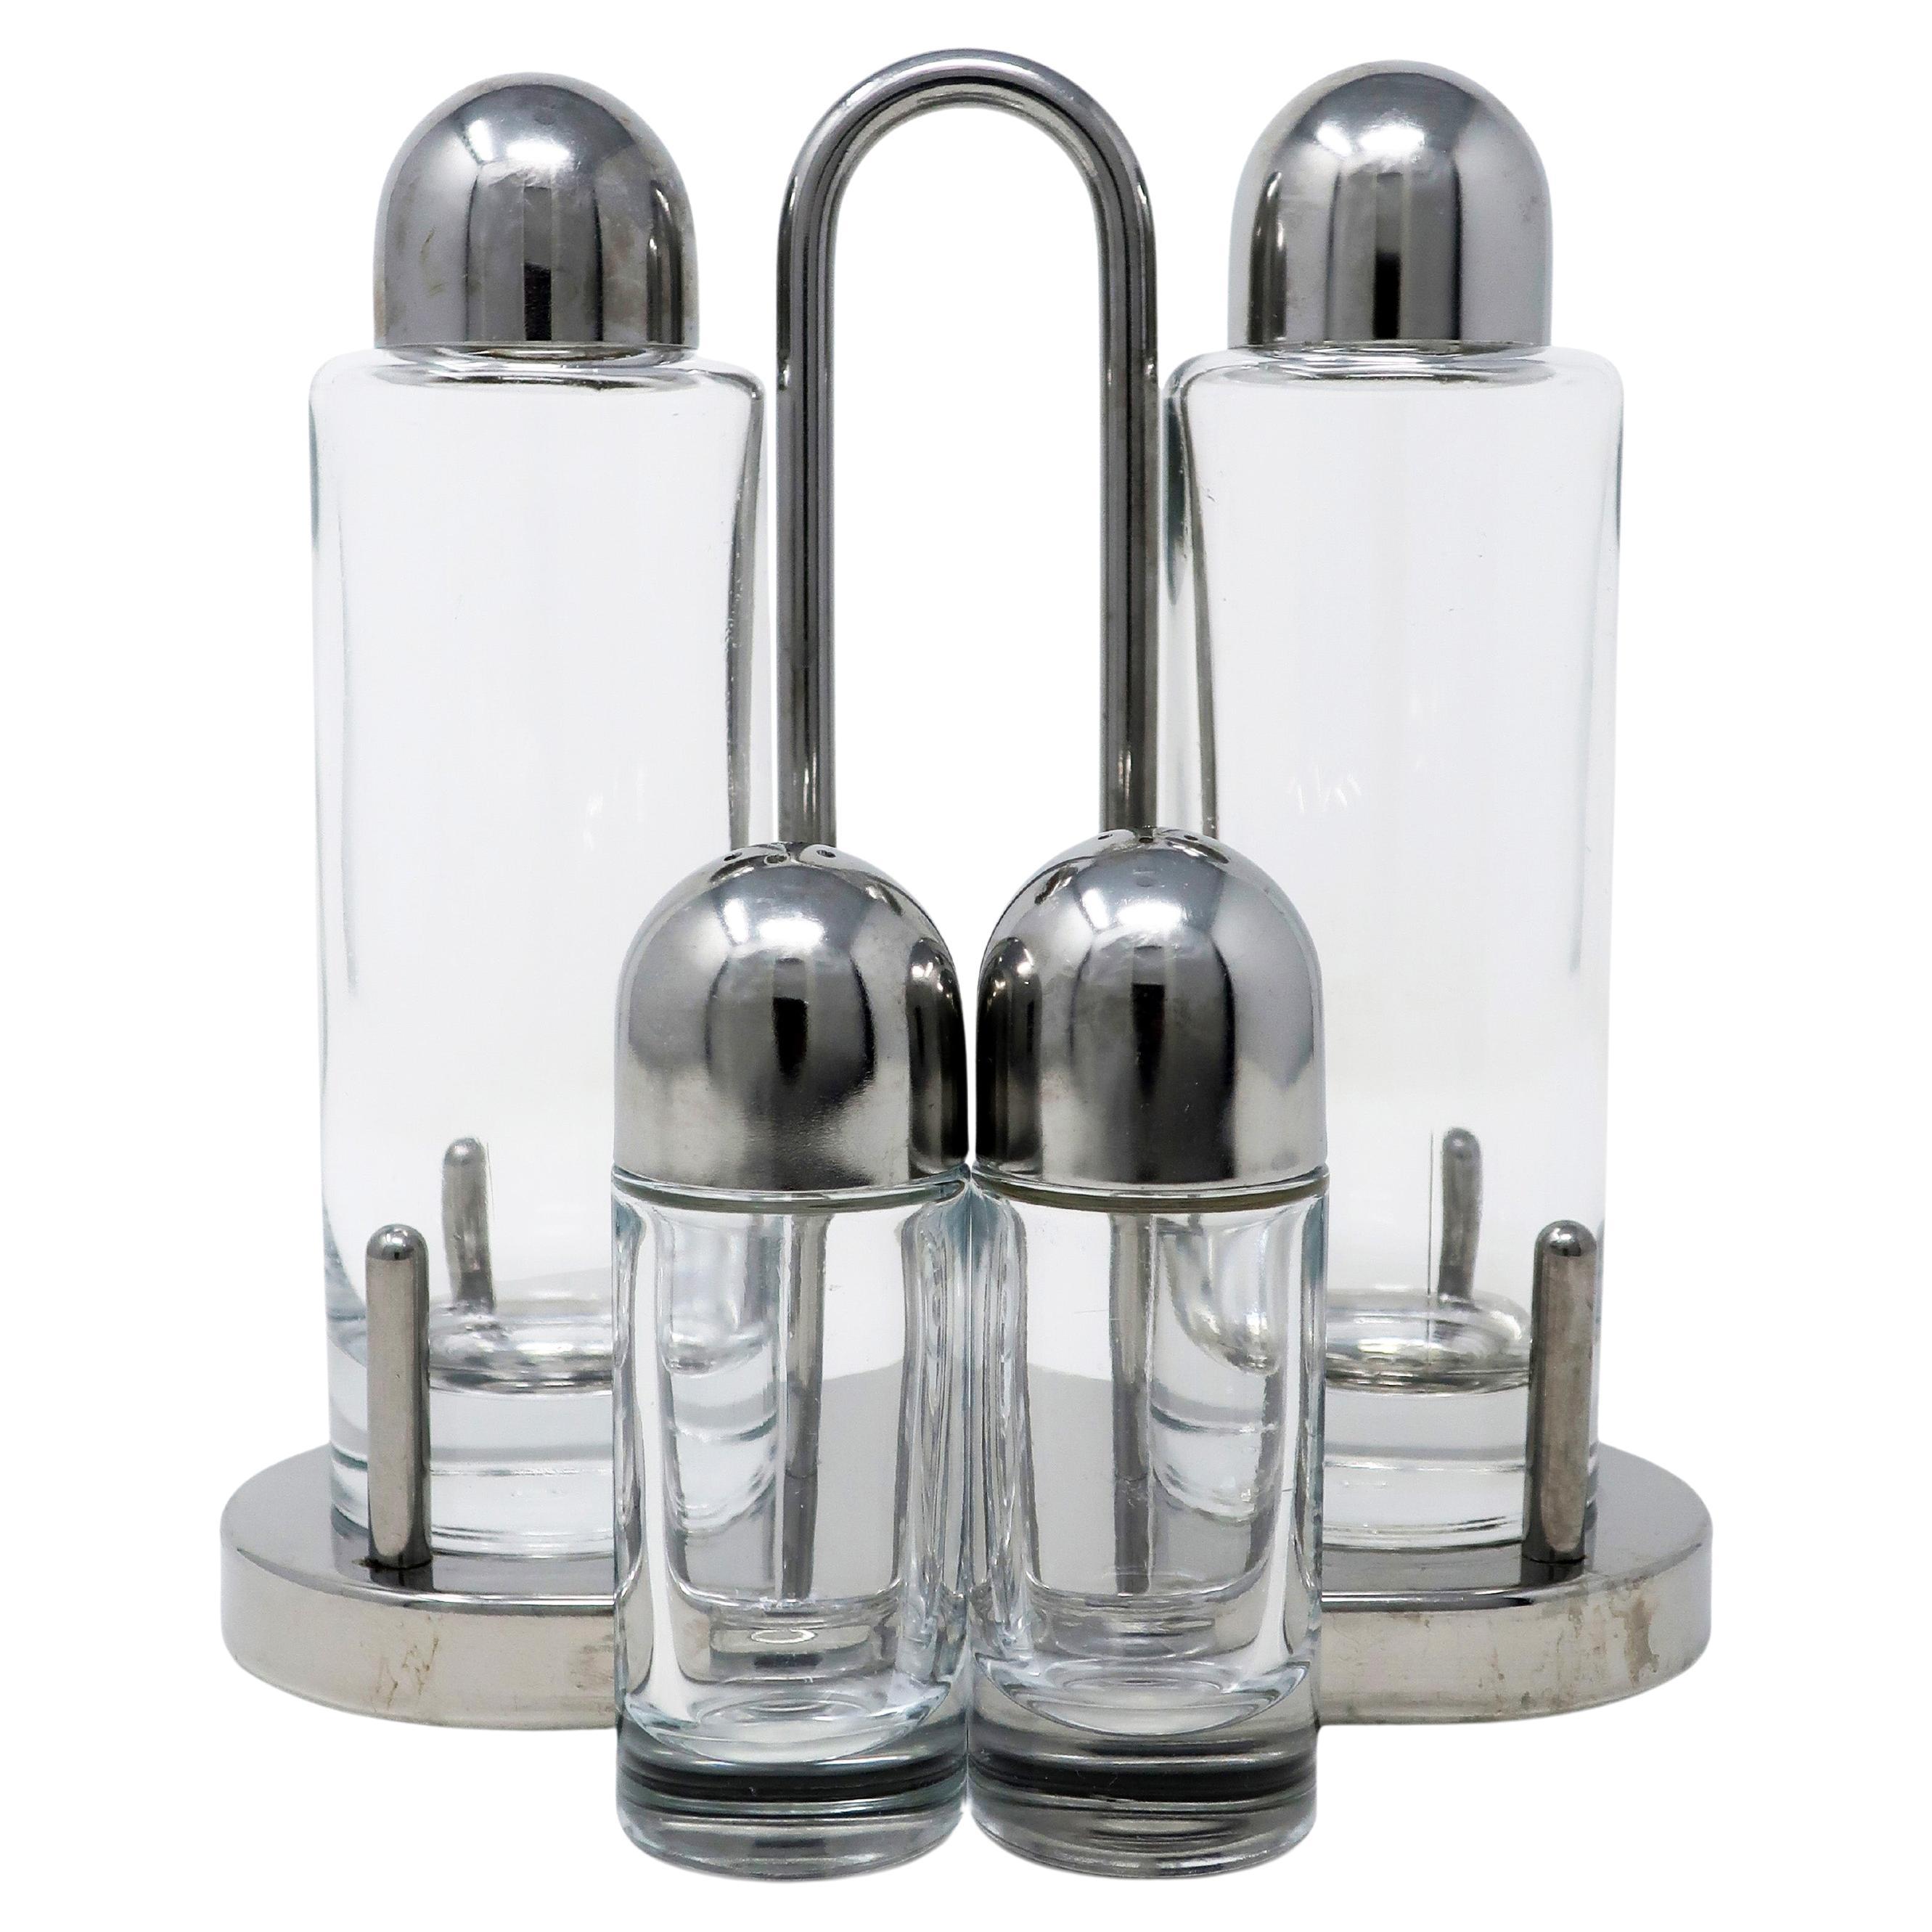 Stainless Steel and Glass Cruet Set by Ettore Sottsass for Alessi 